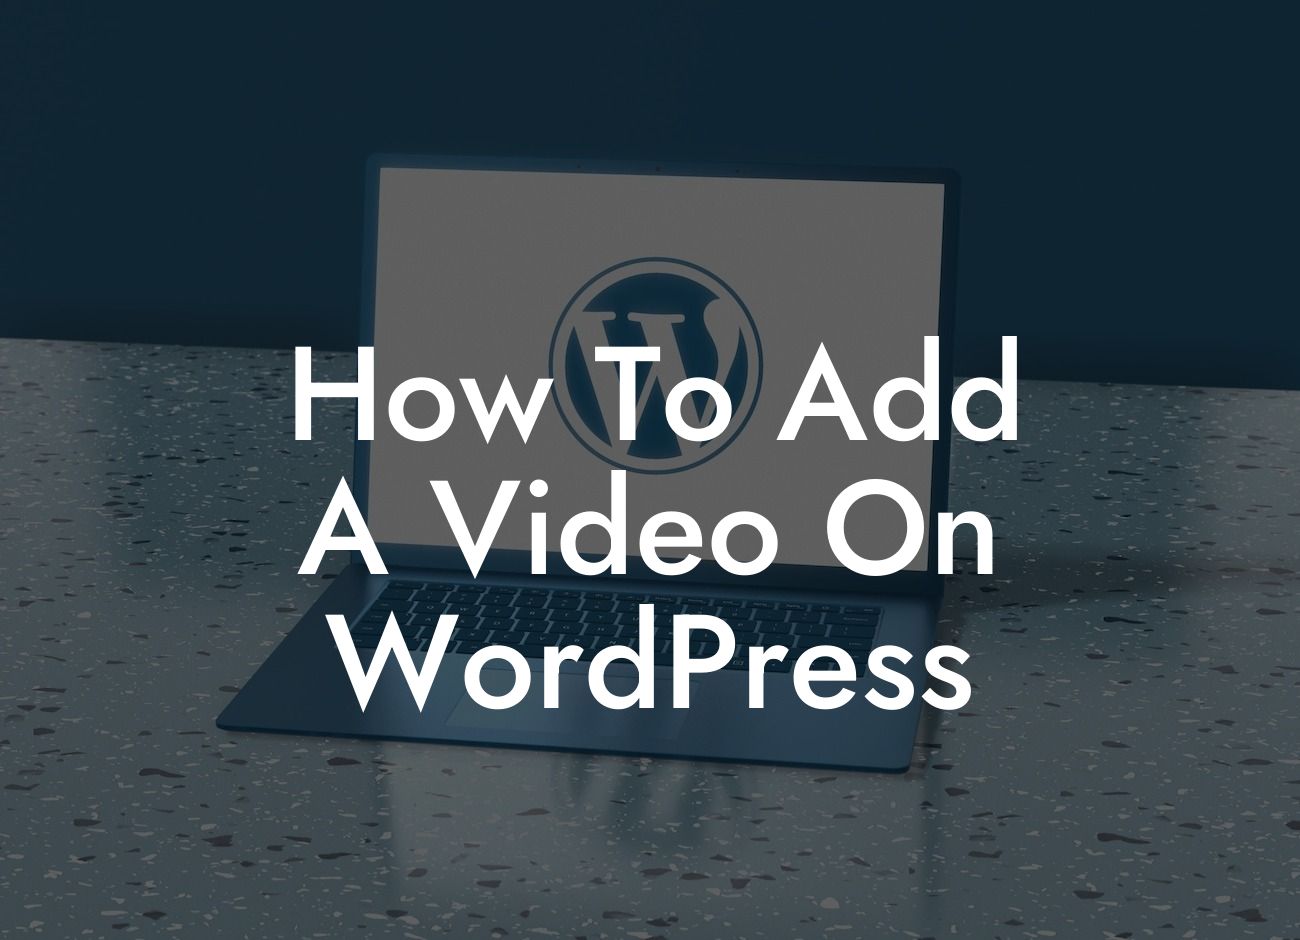 How To Add A Video On WordPress